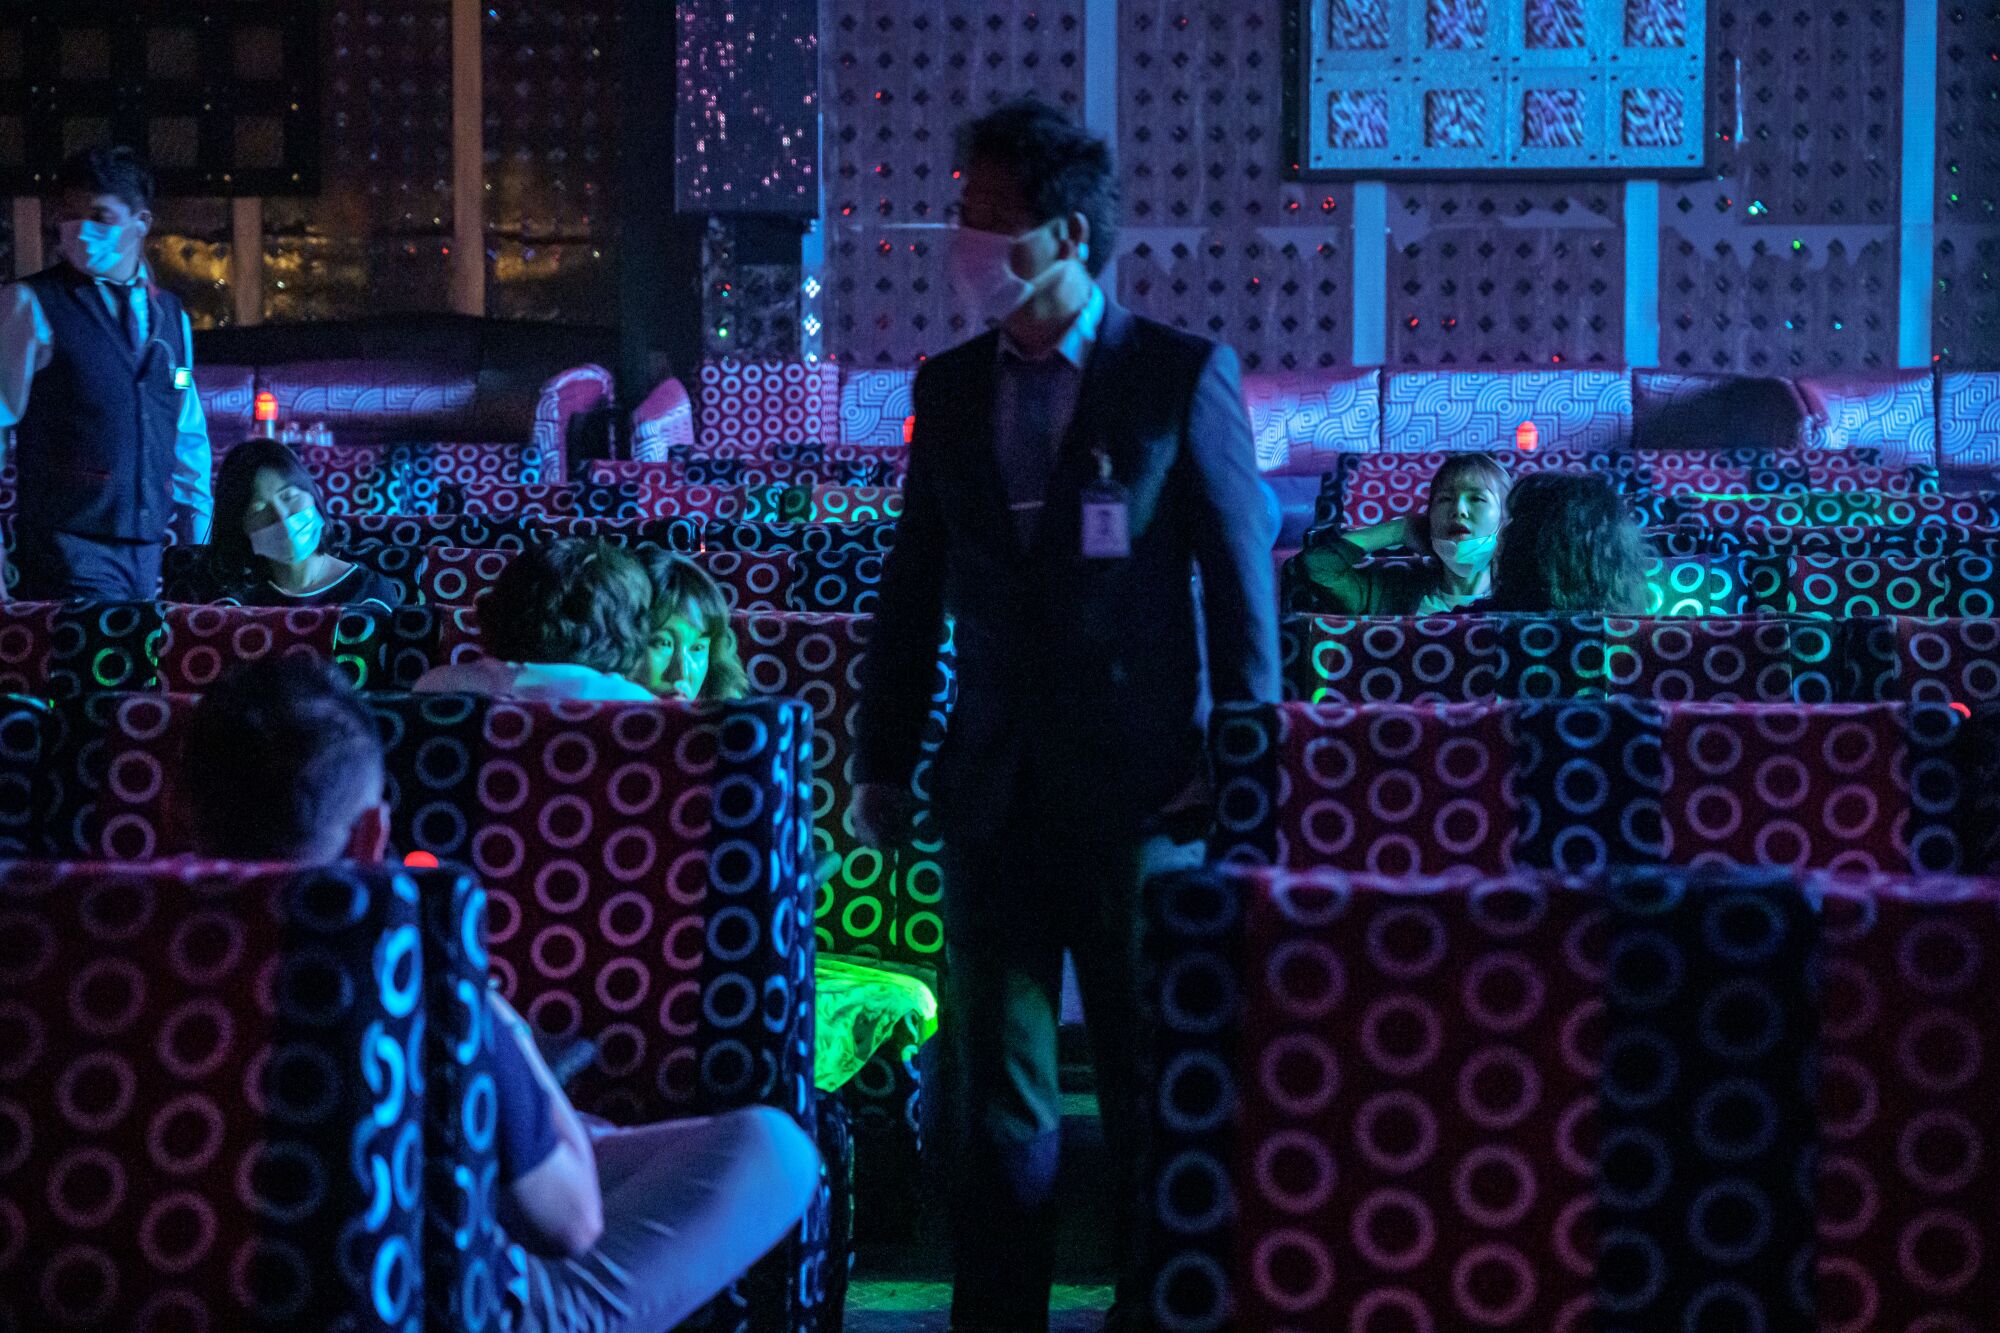 A server walks through the sparsely occupied nightclub in South Korea.